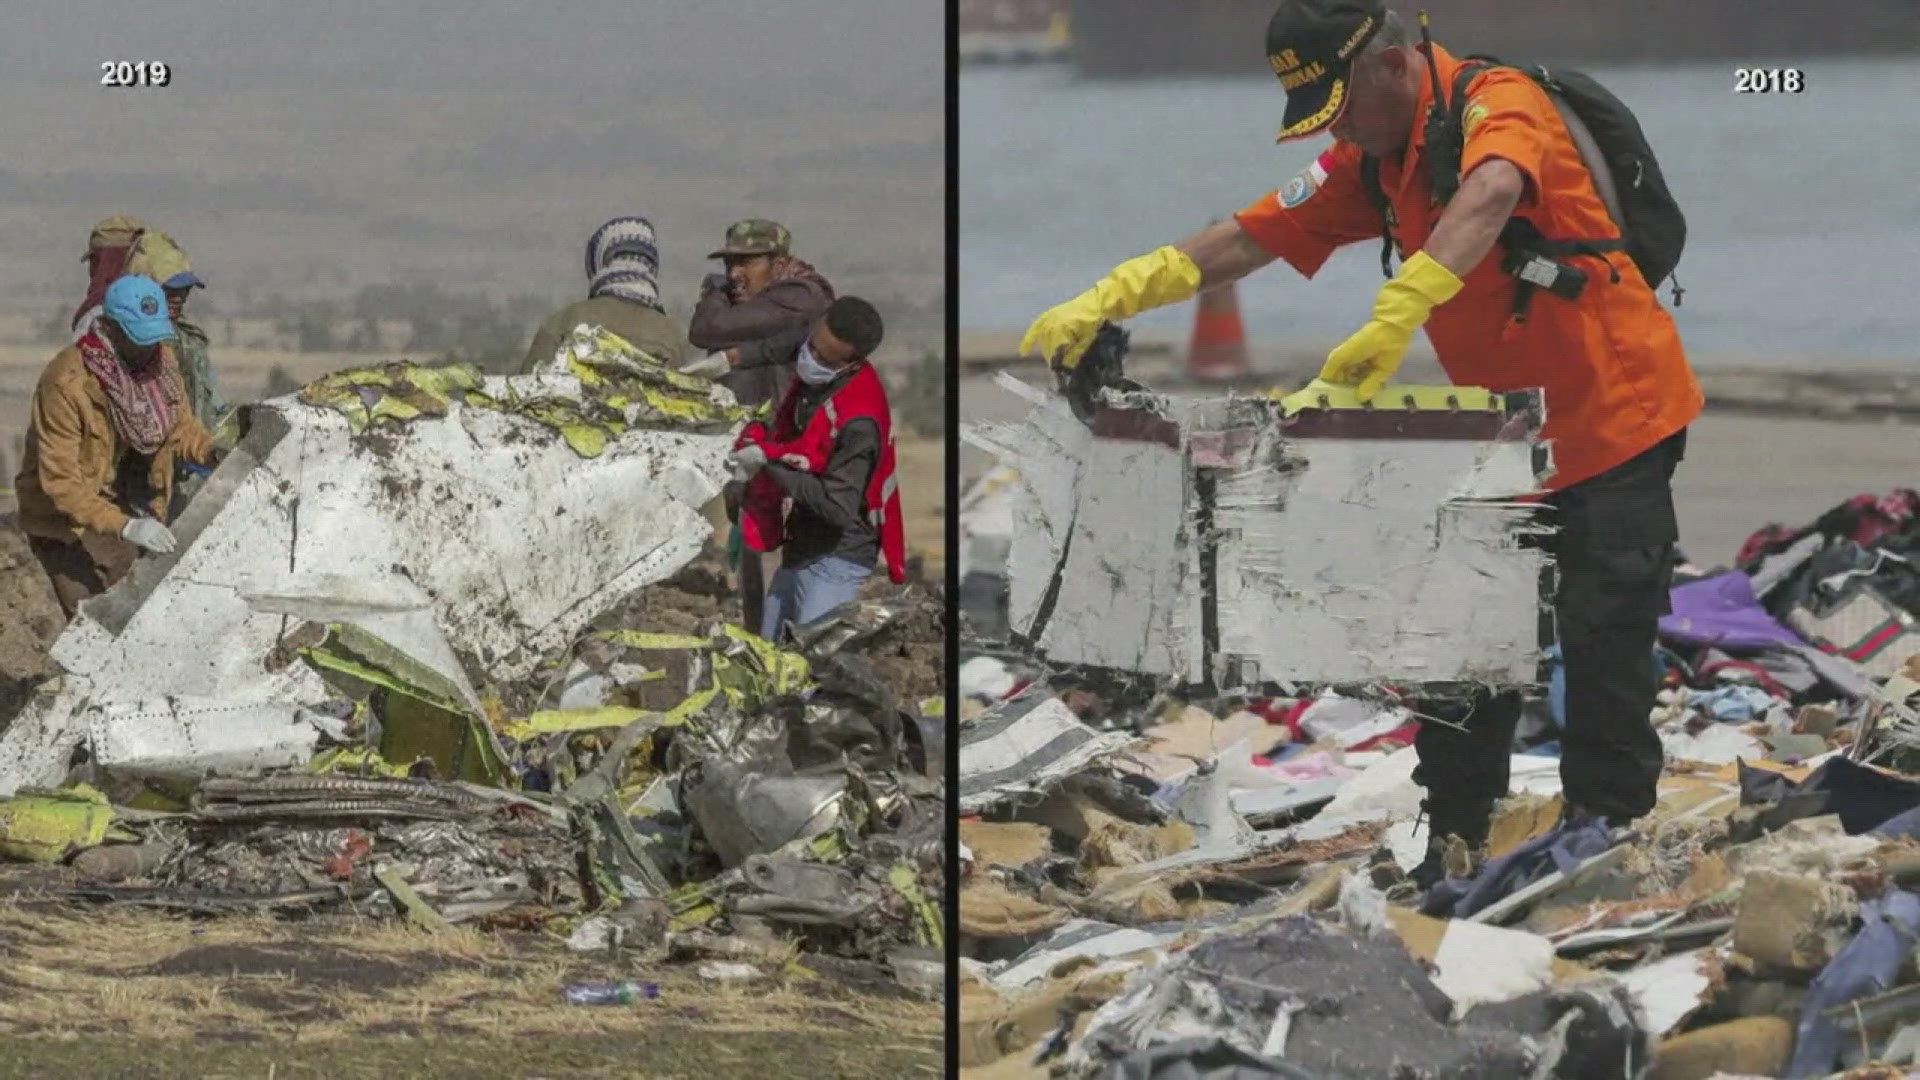 The justice department may criminally prosecute Boeing over the two deadly 737 max jet crashes.